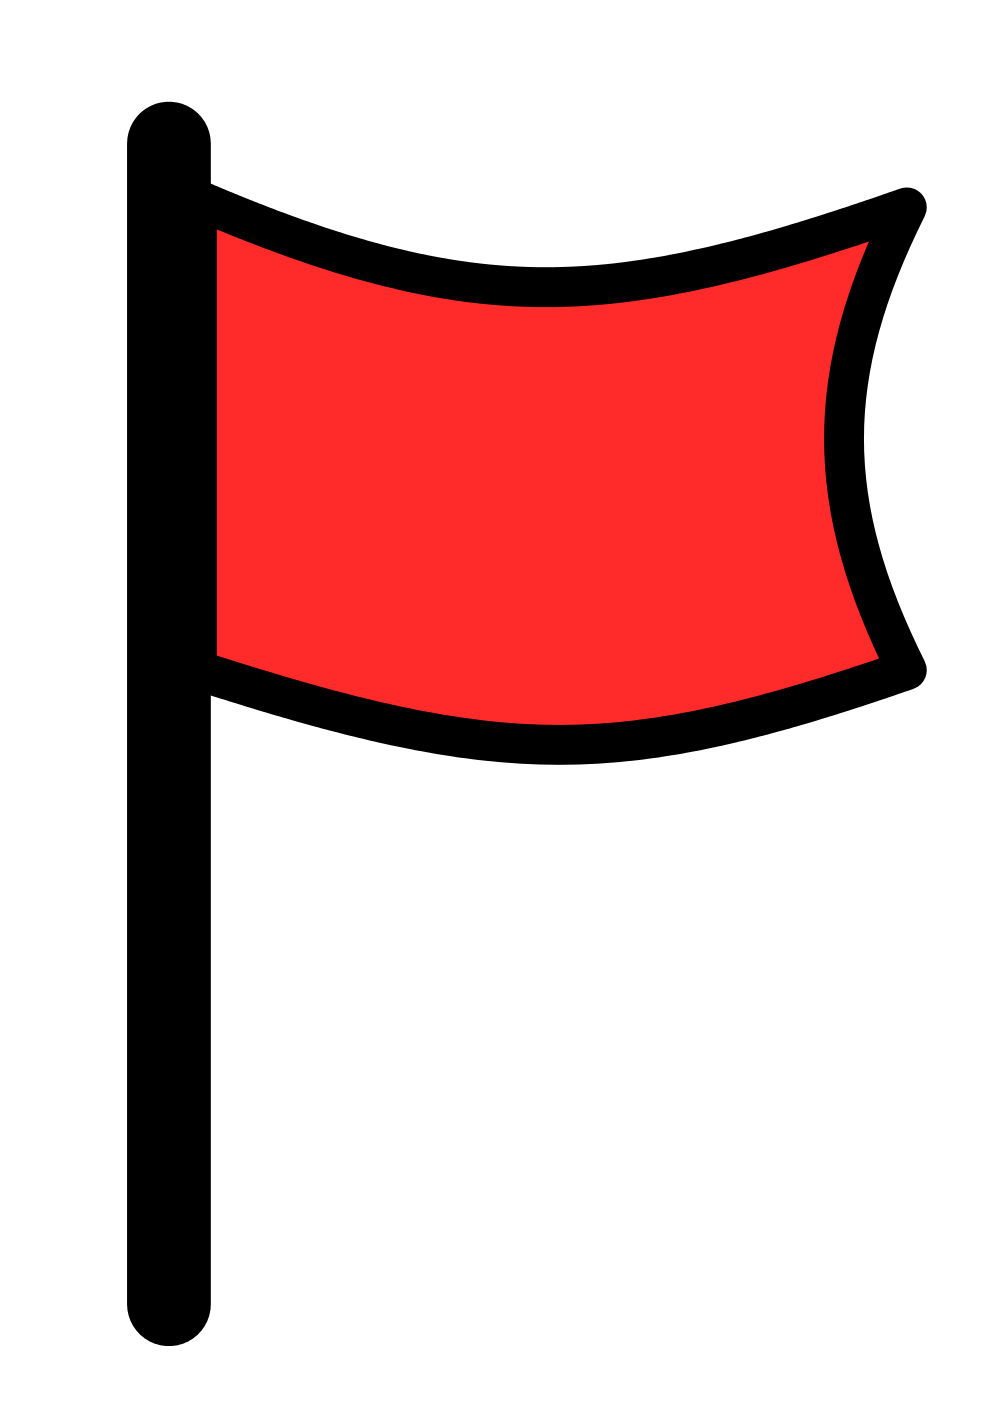 File:Flag icon red 4.svg